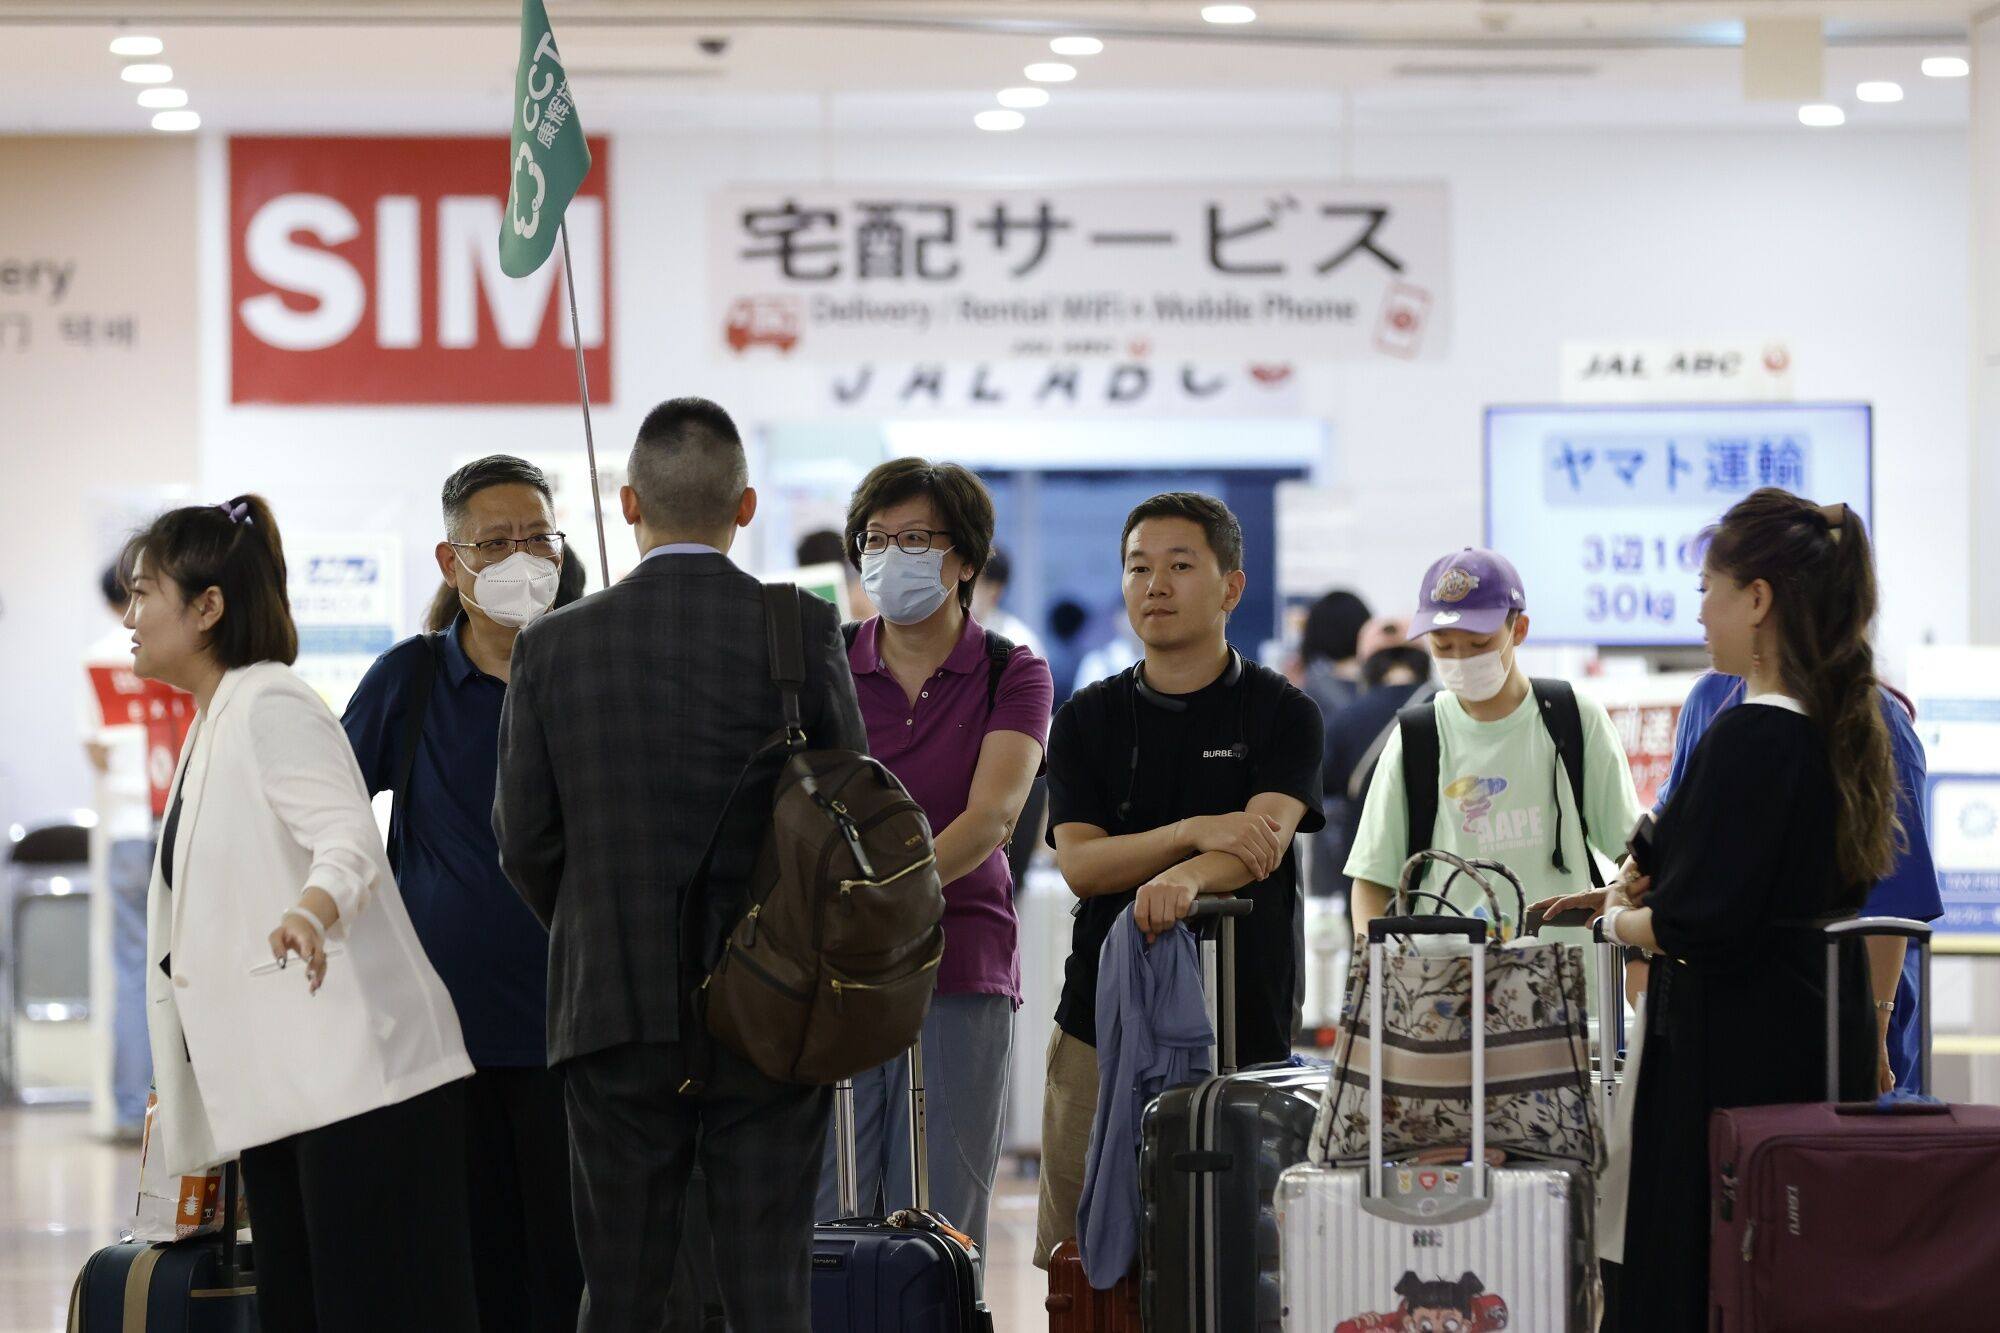 Chinese tourists arrive at Haneda Airport. Survey respondents that spoke to This Week in Asia clarified they did not dislike the Chinese people and culture, with their negative feelings only aimed at the Chinese government. Photo: Bloomberg